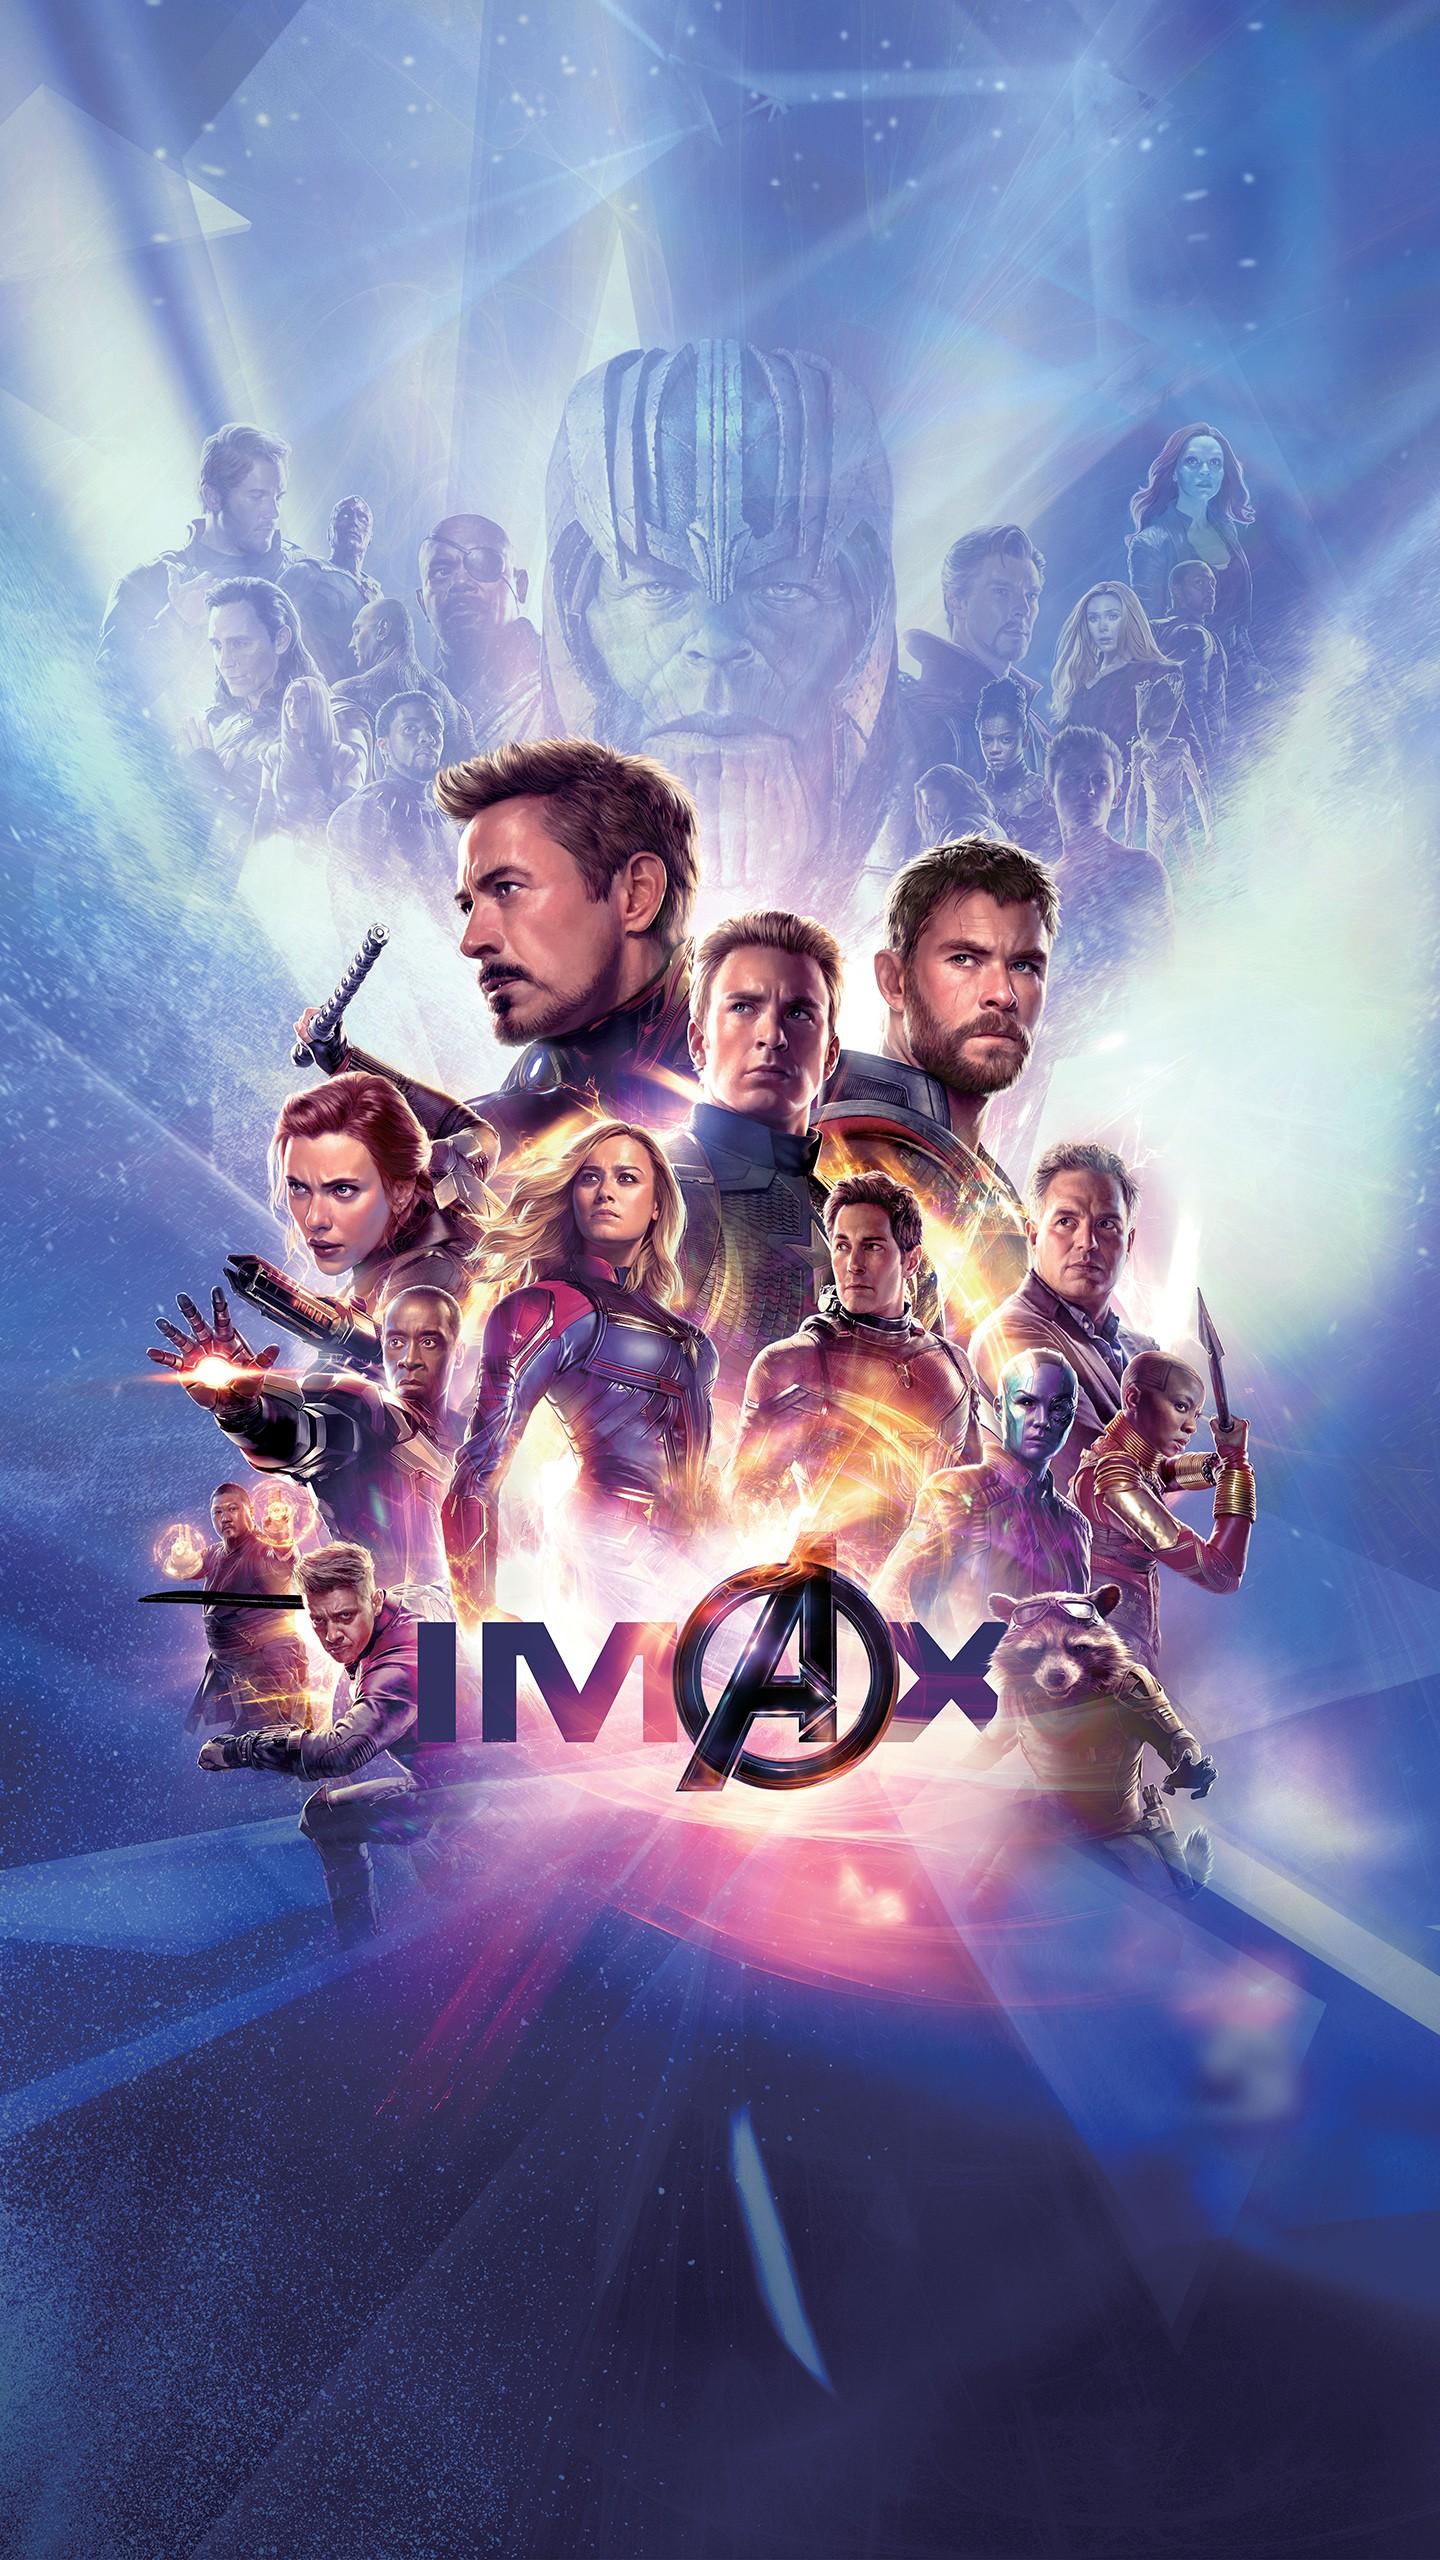 Download Avengers Endgame HD Wallpaper For iPhone X